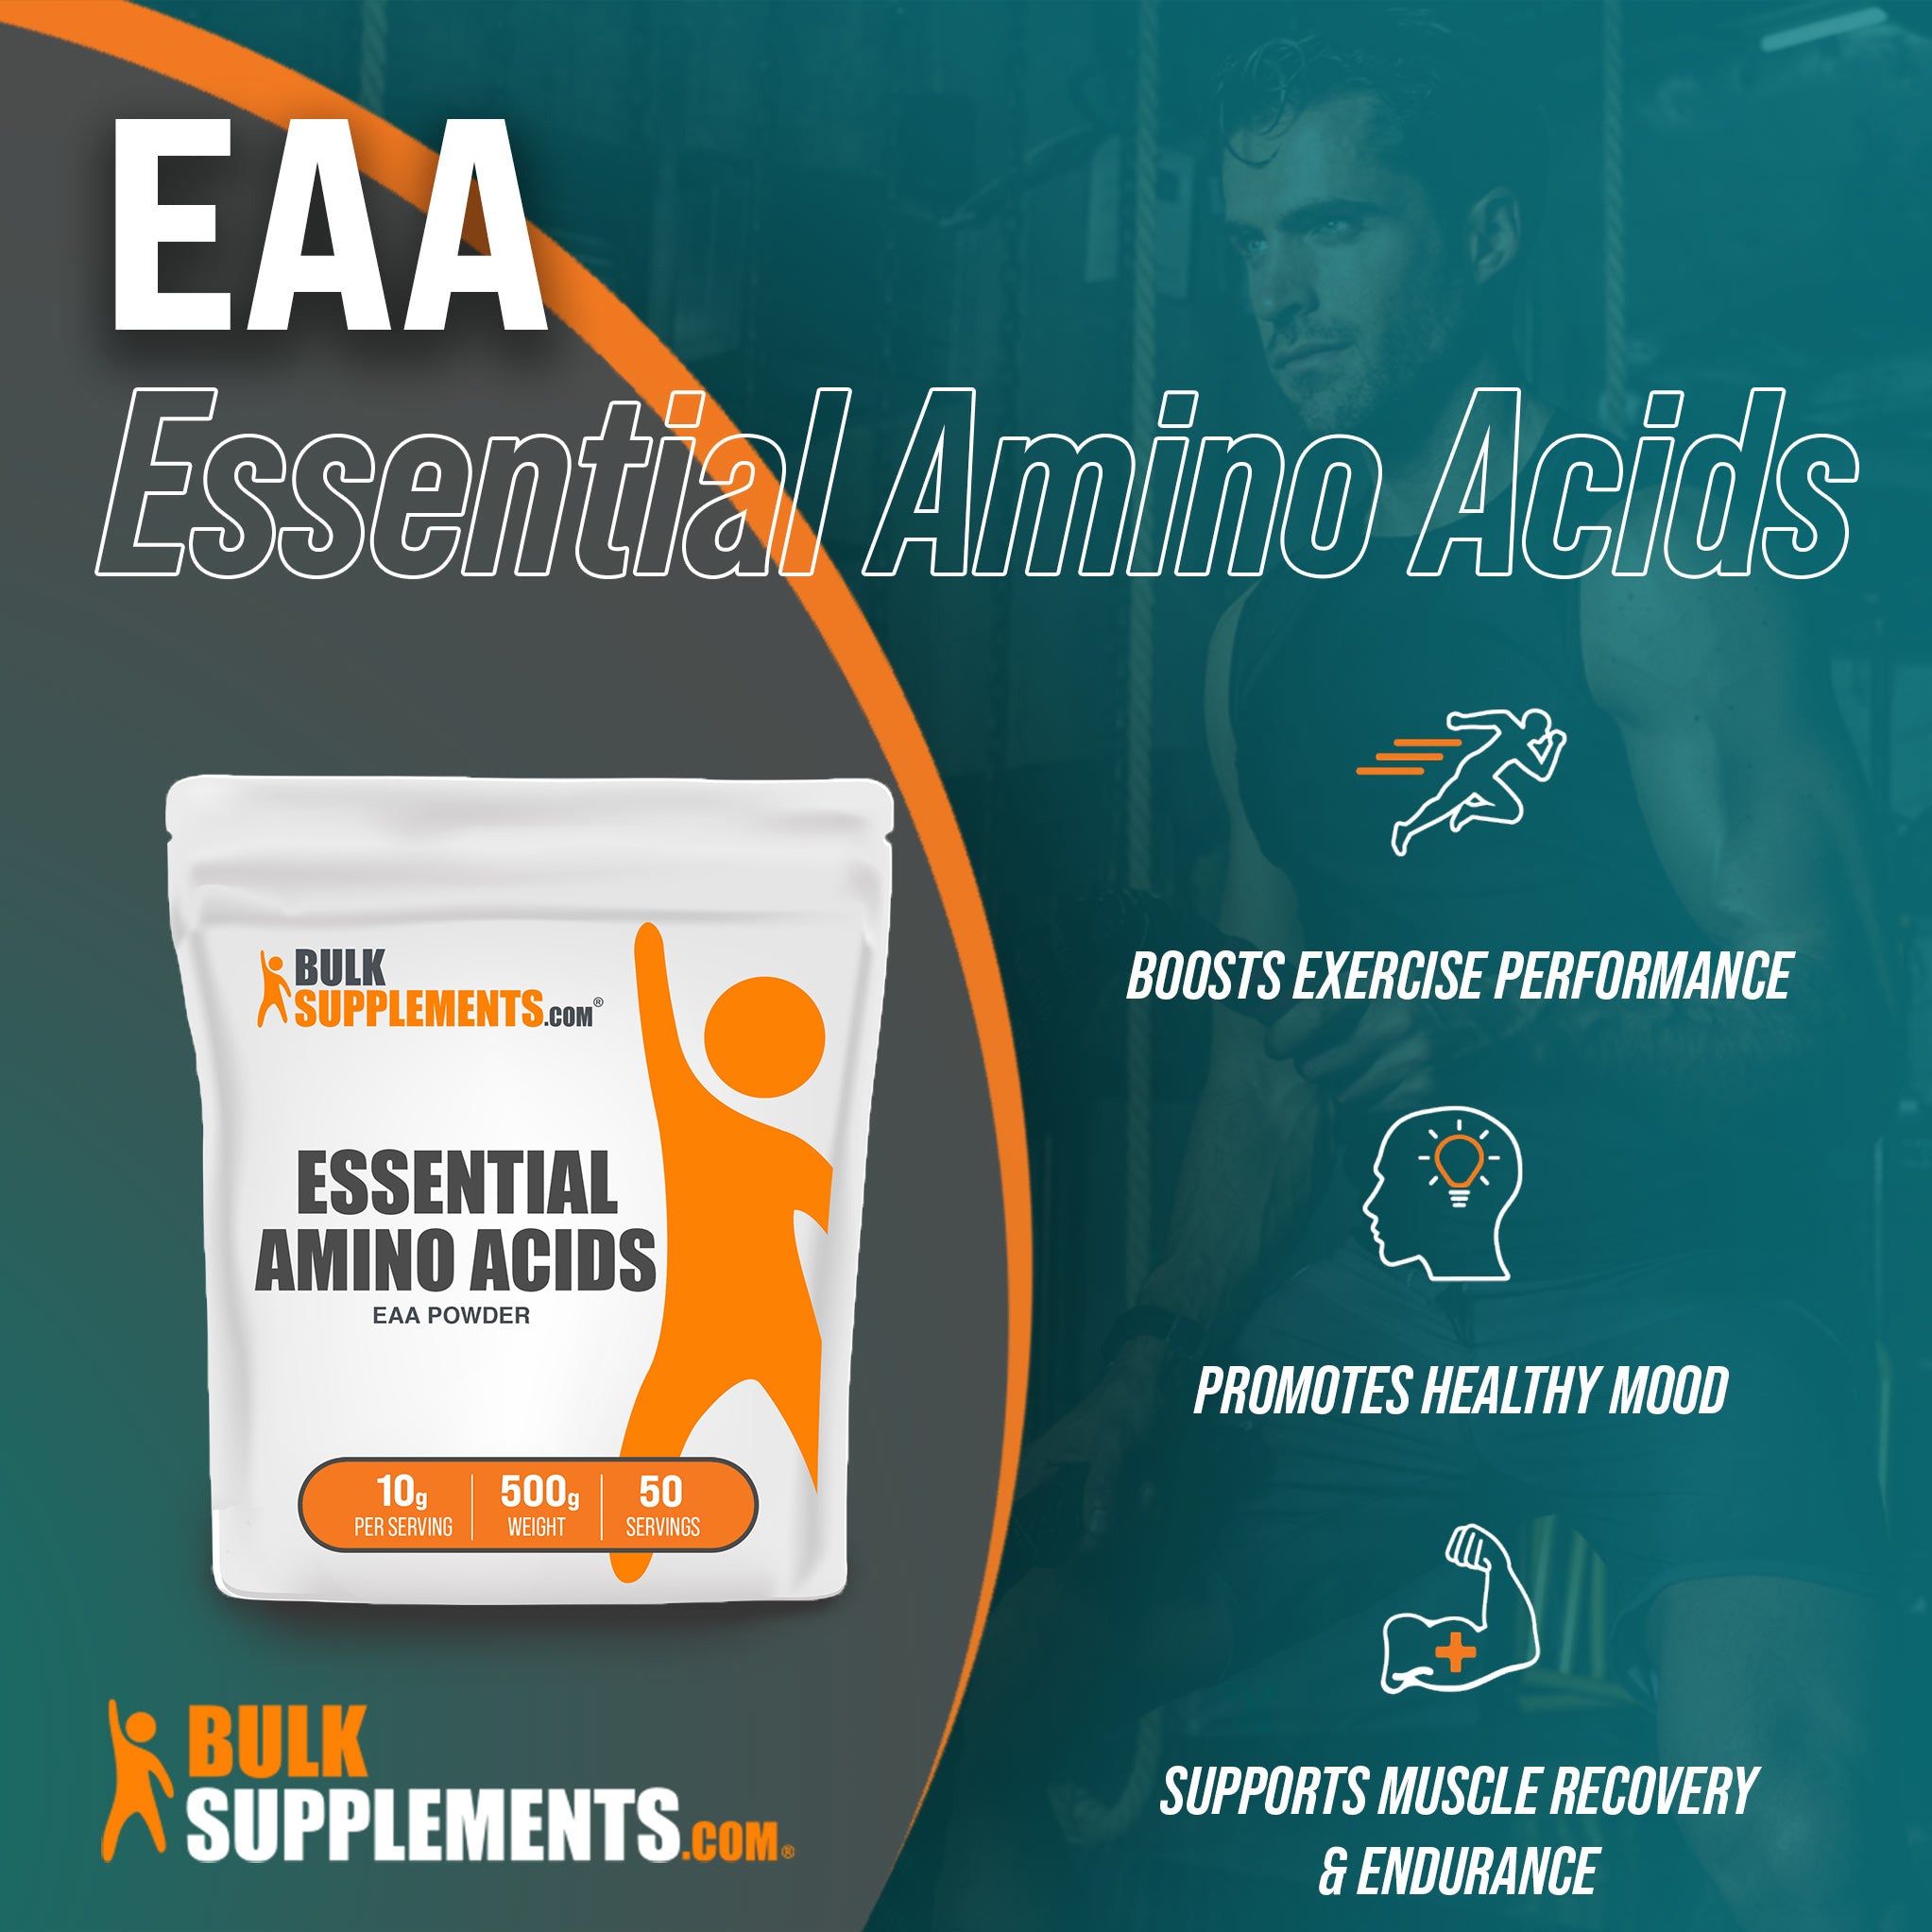 Benefits of EAA Essential Amino Acids; boosts exercise performance, promotes healthy mood, supports muscle recovery and endurance